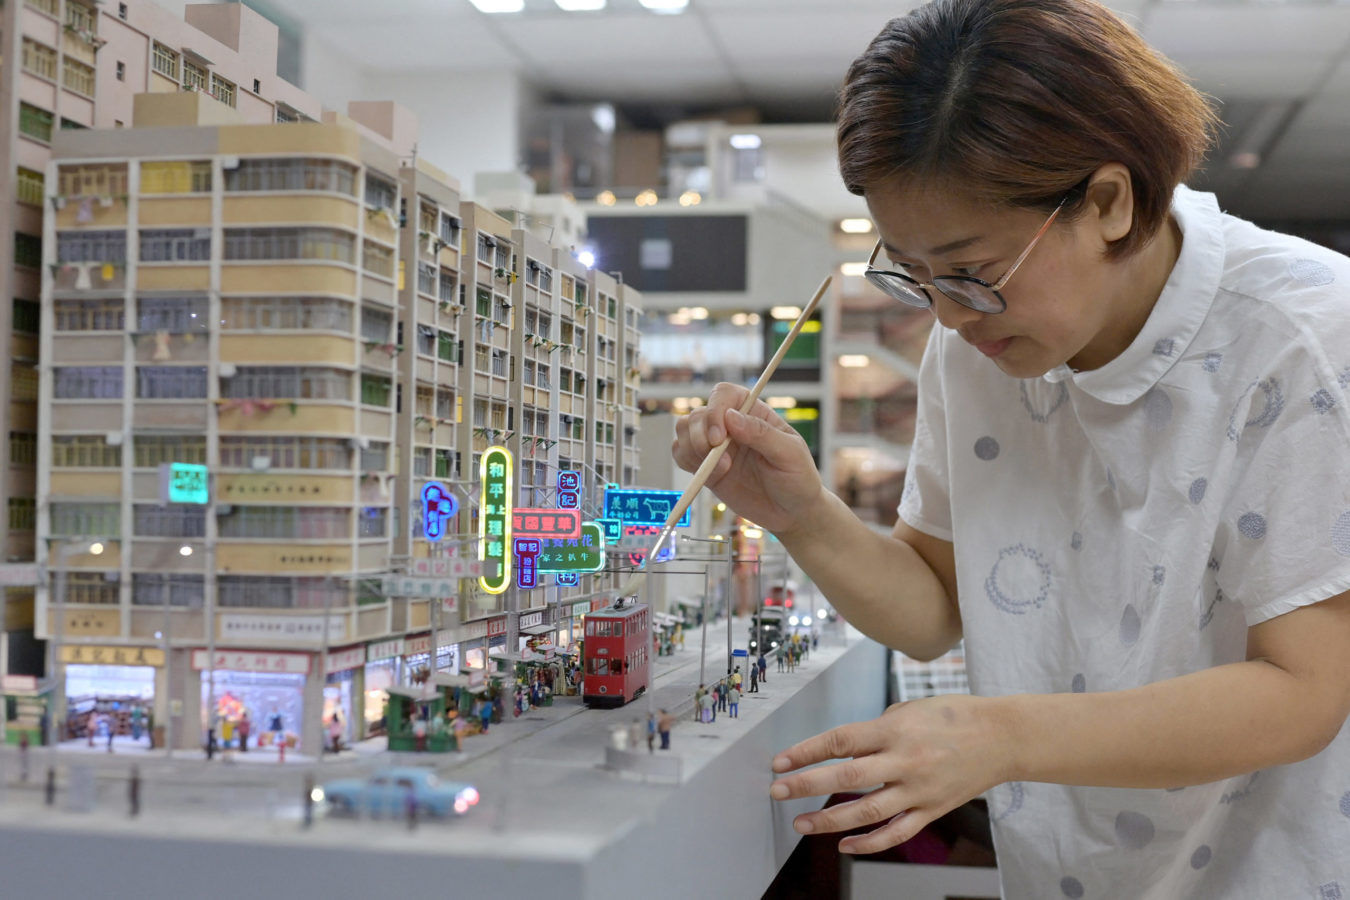 Local artists, Tony Lai and Maggie Chan, revive Hong Kong’s bygone era in detailed miniatures